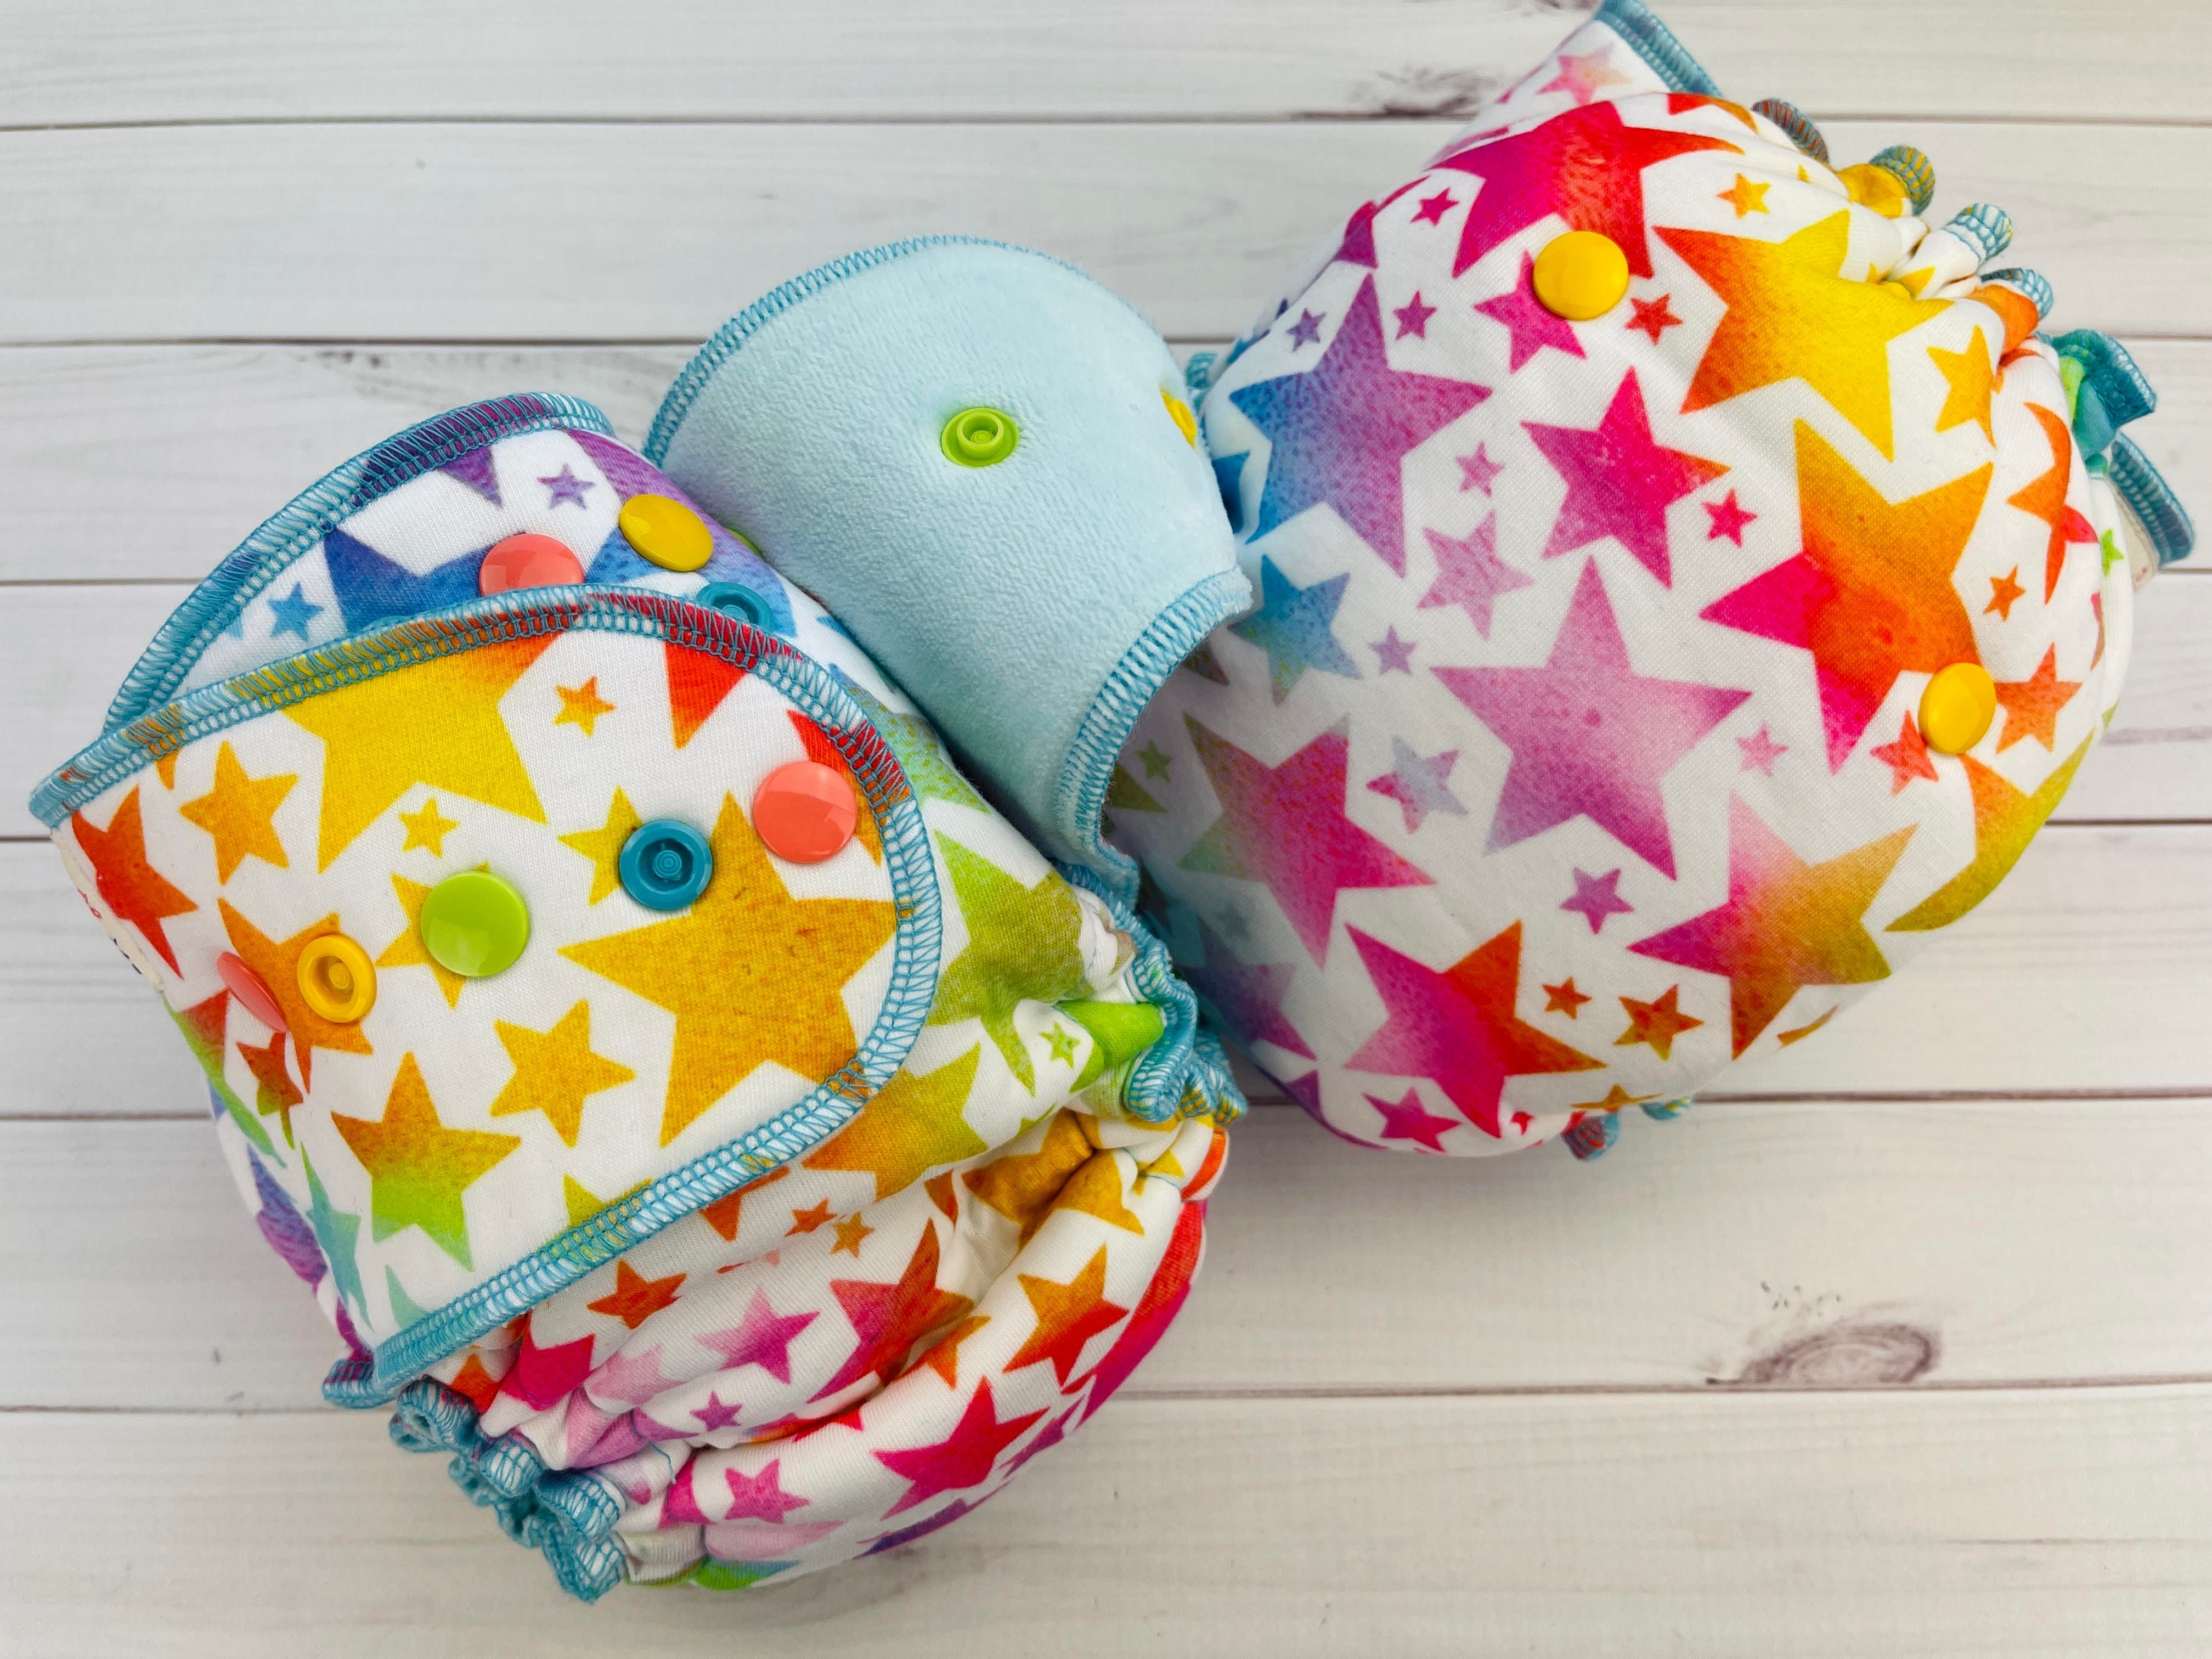 Lilly & Frank One Size Cloth Diaper Spectacular Stars One Size Cloth Diaper - Hybrid - Serged